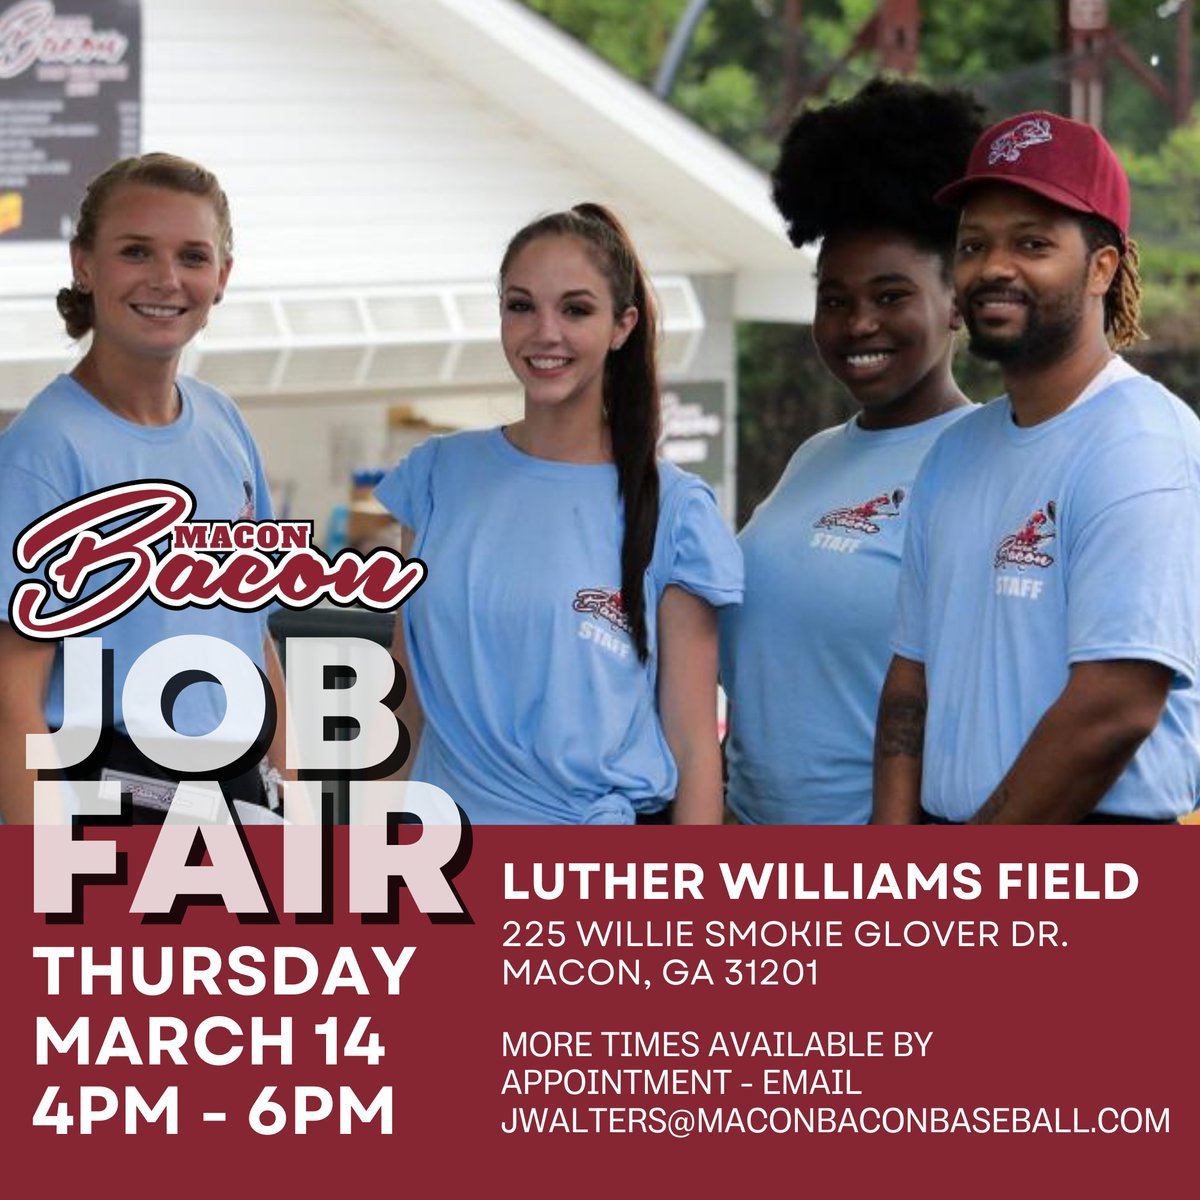 Looking for a part-time job? Attend a Macon Bacon job fair! We need help scanning tickets, serving food, and entertaining our fans this summer. Stop by Luther Williams Field any time from 4-6pm on Thursday, March 14th for your chance to join the most fun team in sports! 😎🥓